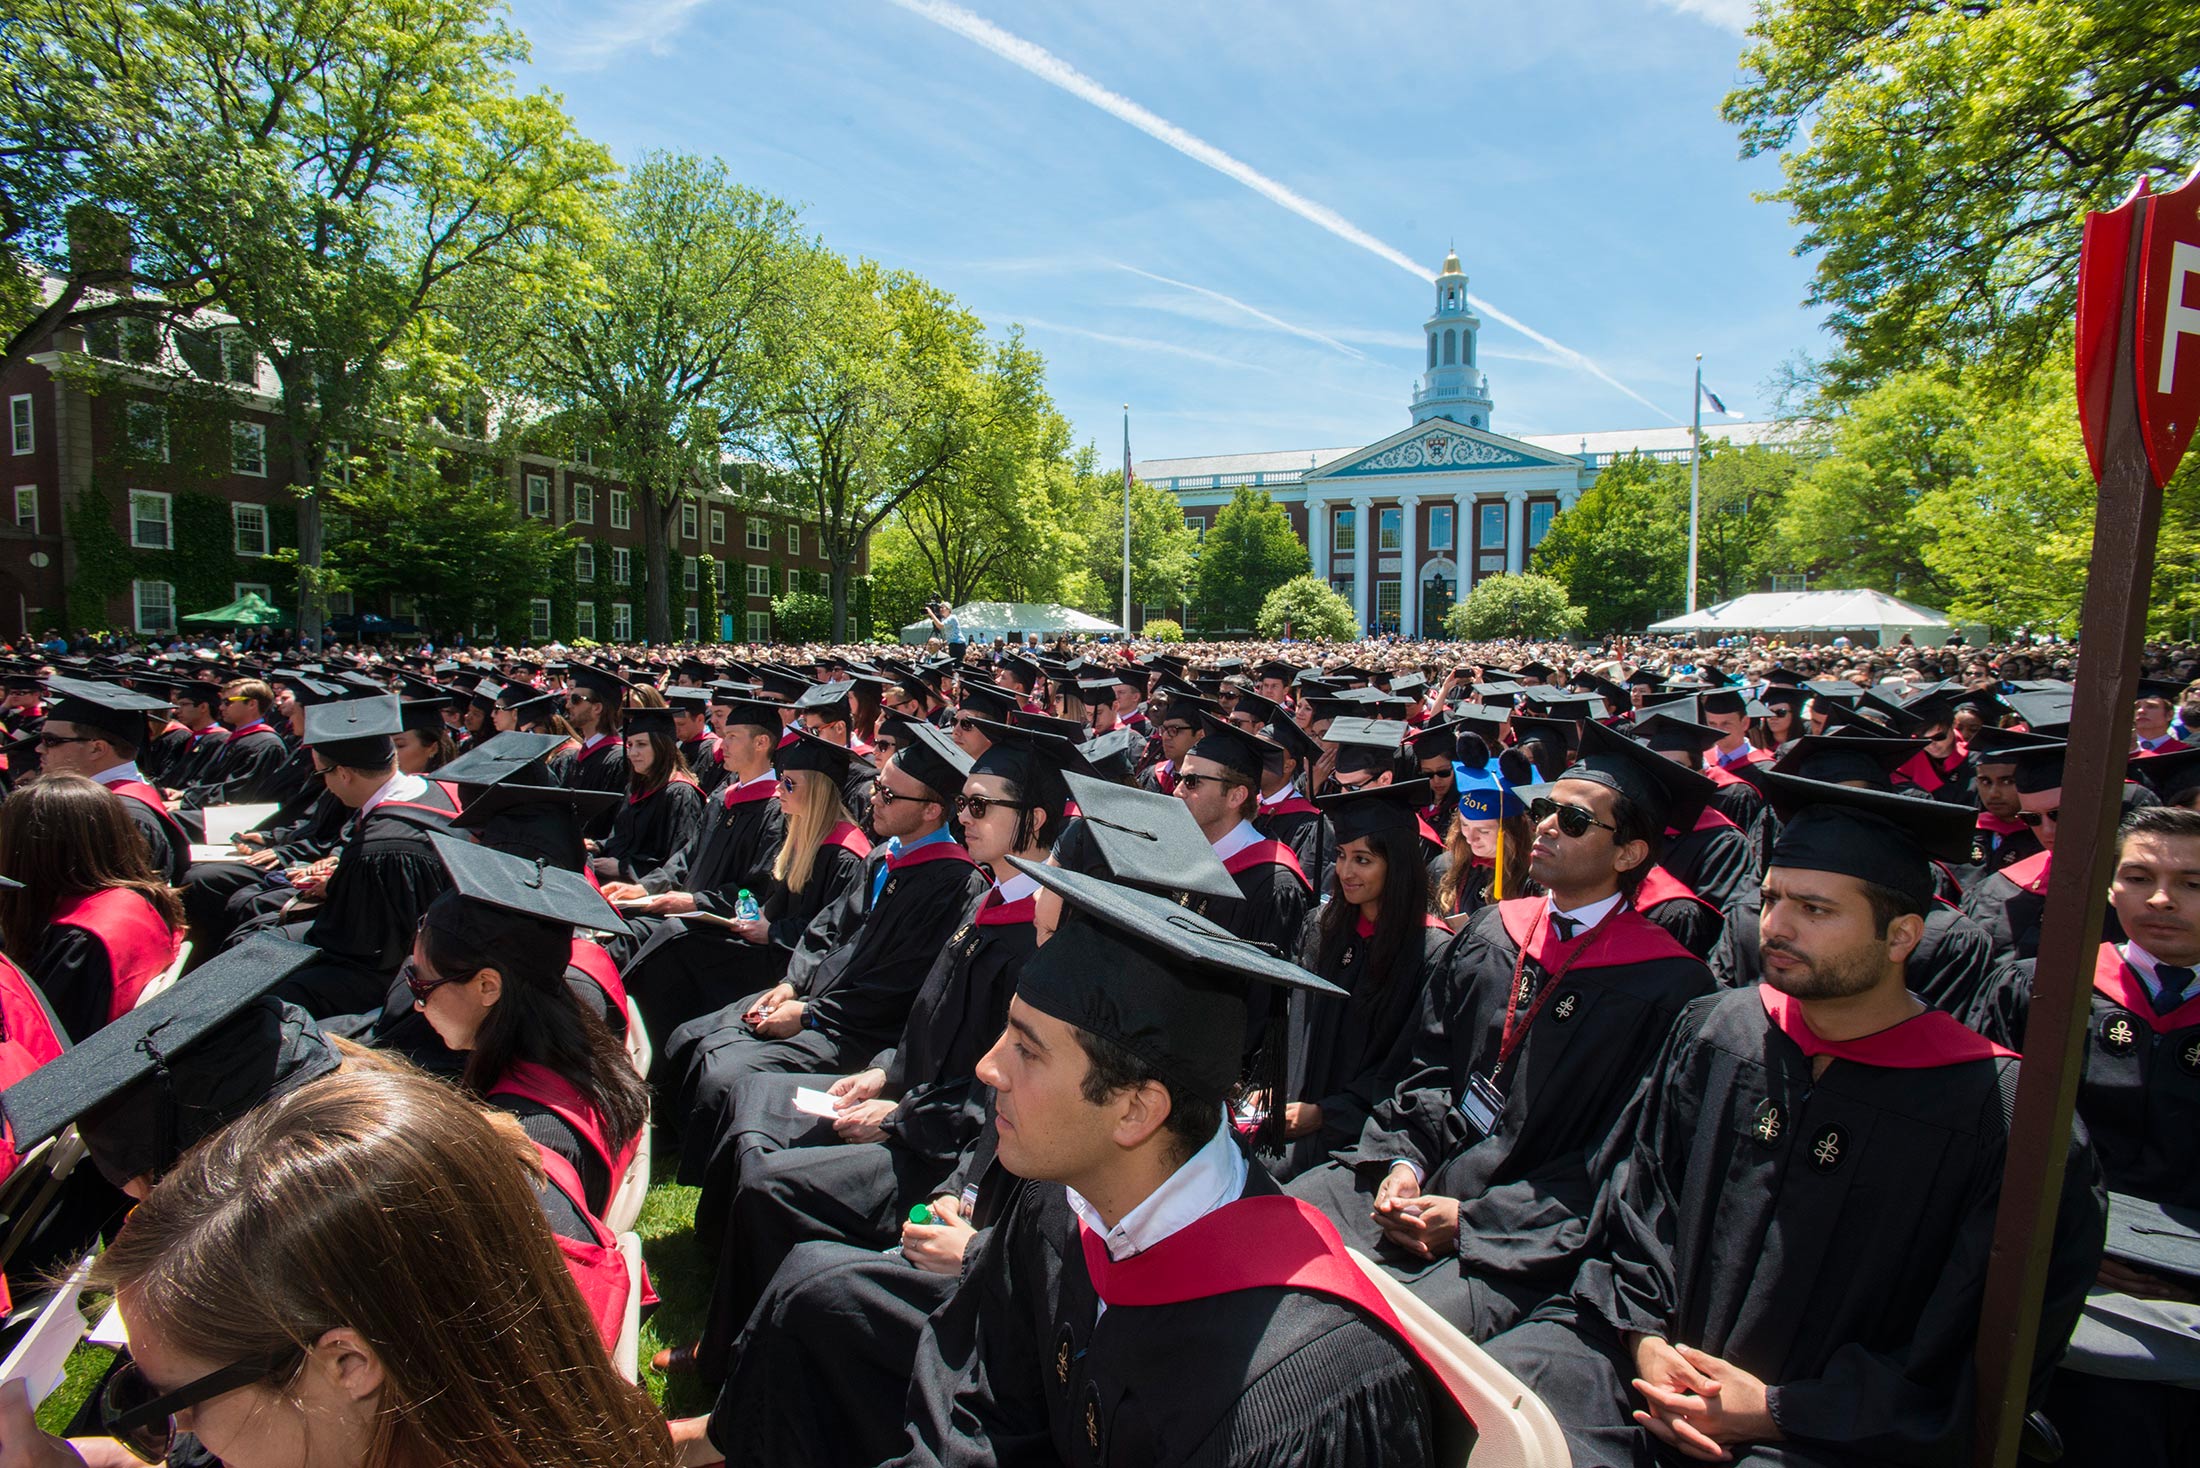 Commencement ceremonies at the Harvard Business School campus in Boston on May 29, 2014.
